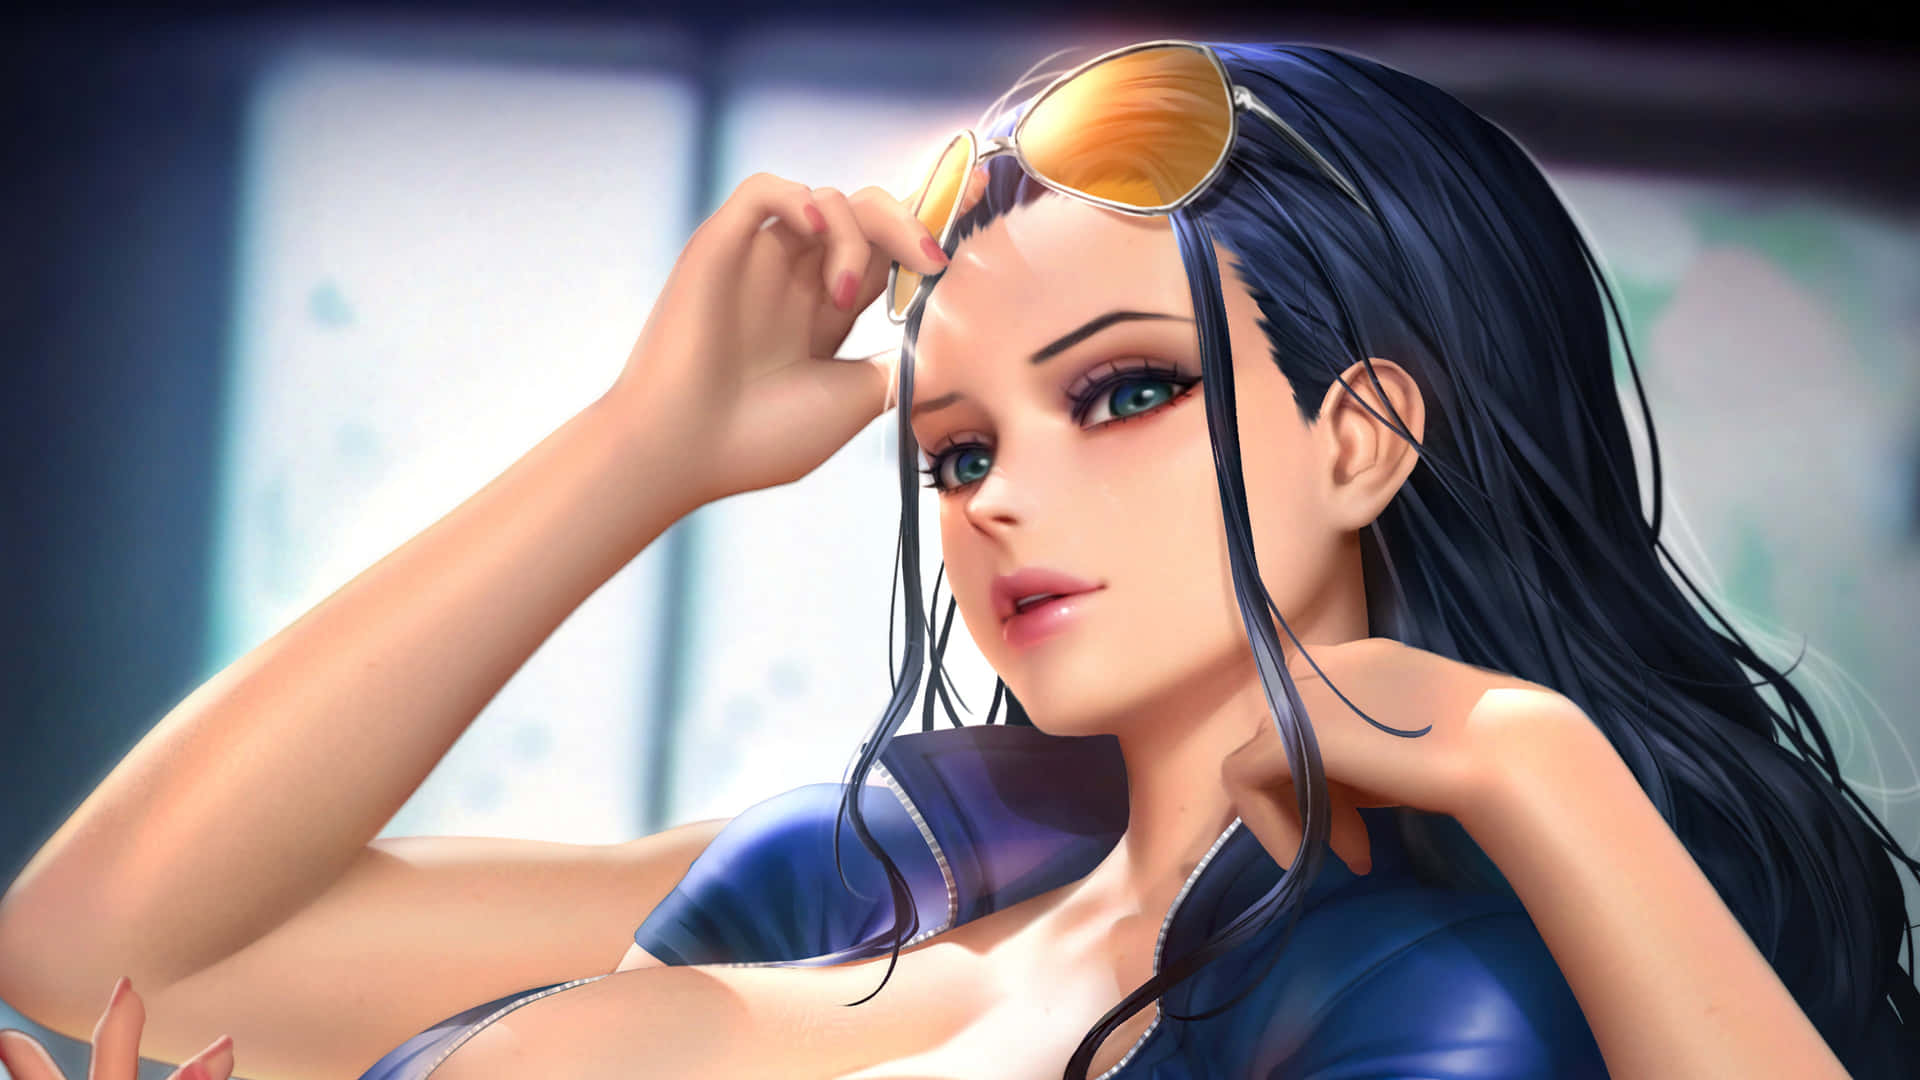 Smiling Nico Robin from One Piece" Wallpaper